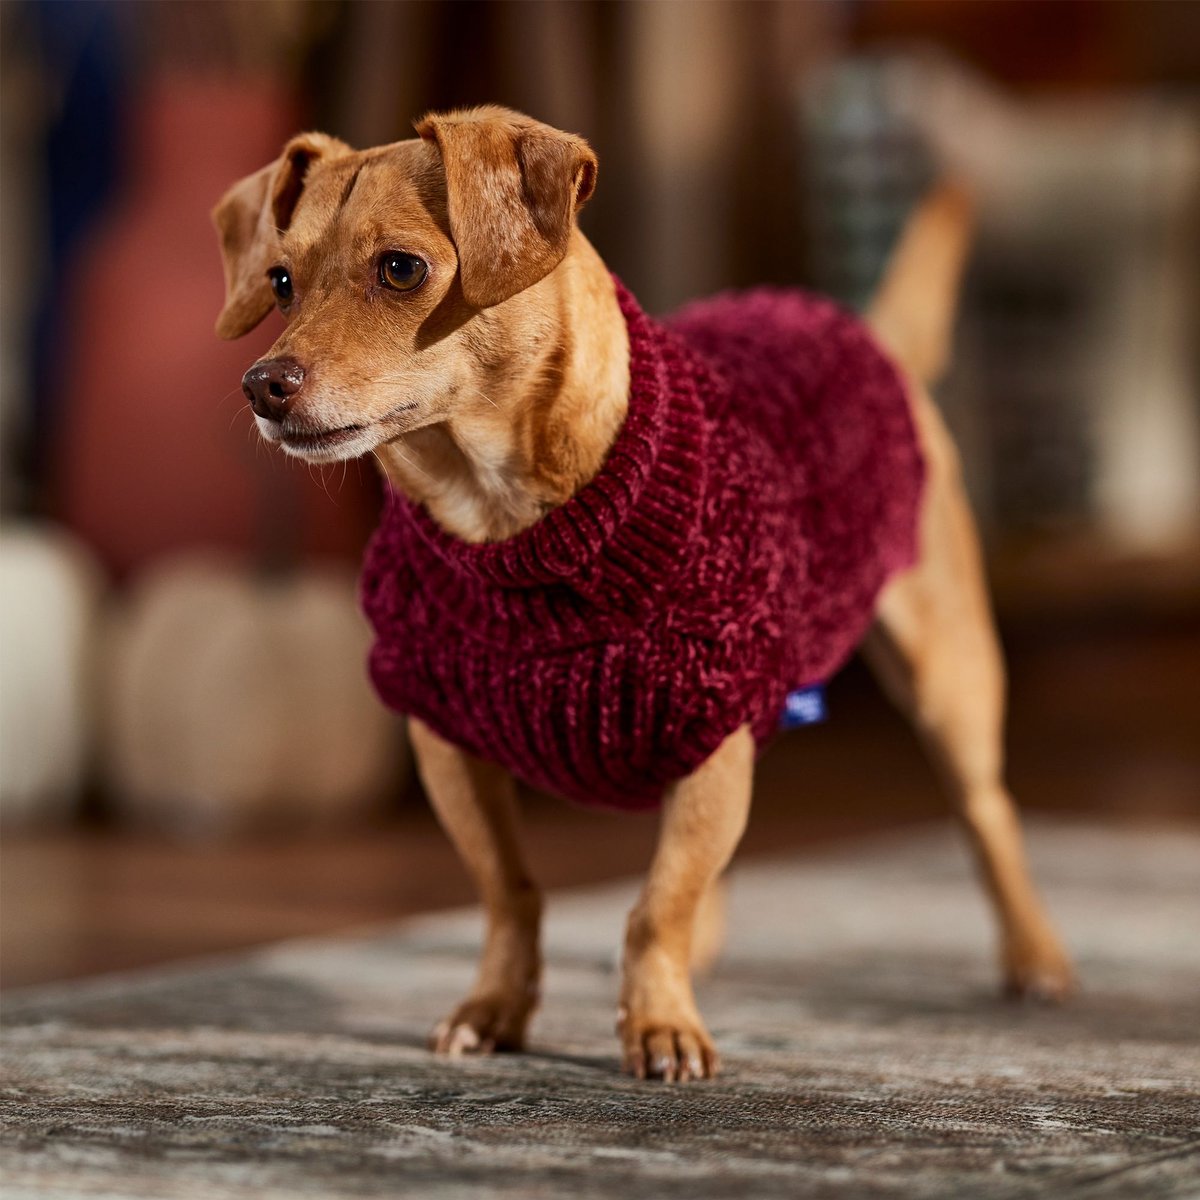 3 Sweater Trends for Pets: Bubble Knits and More